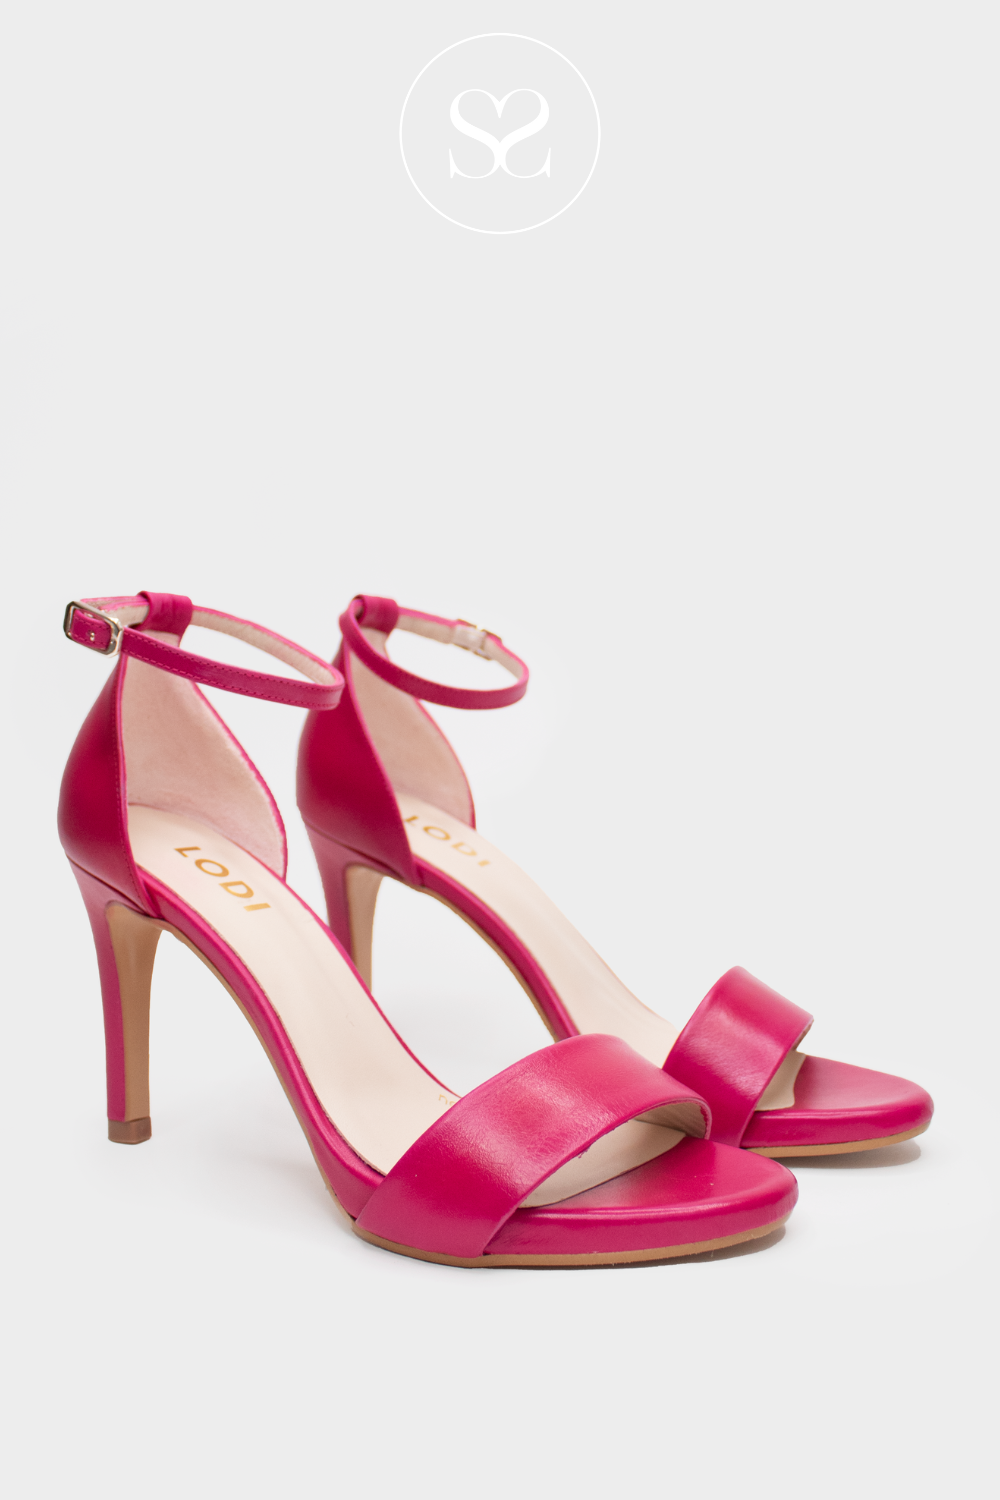 LODI BARELY THERE SANDALS IN HOT PINK